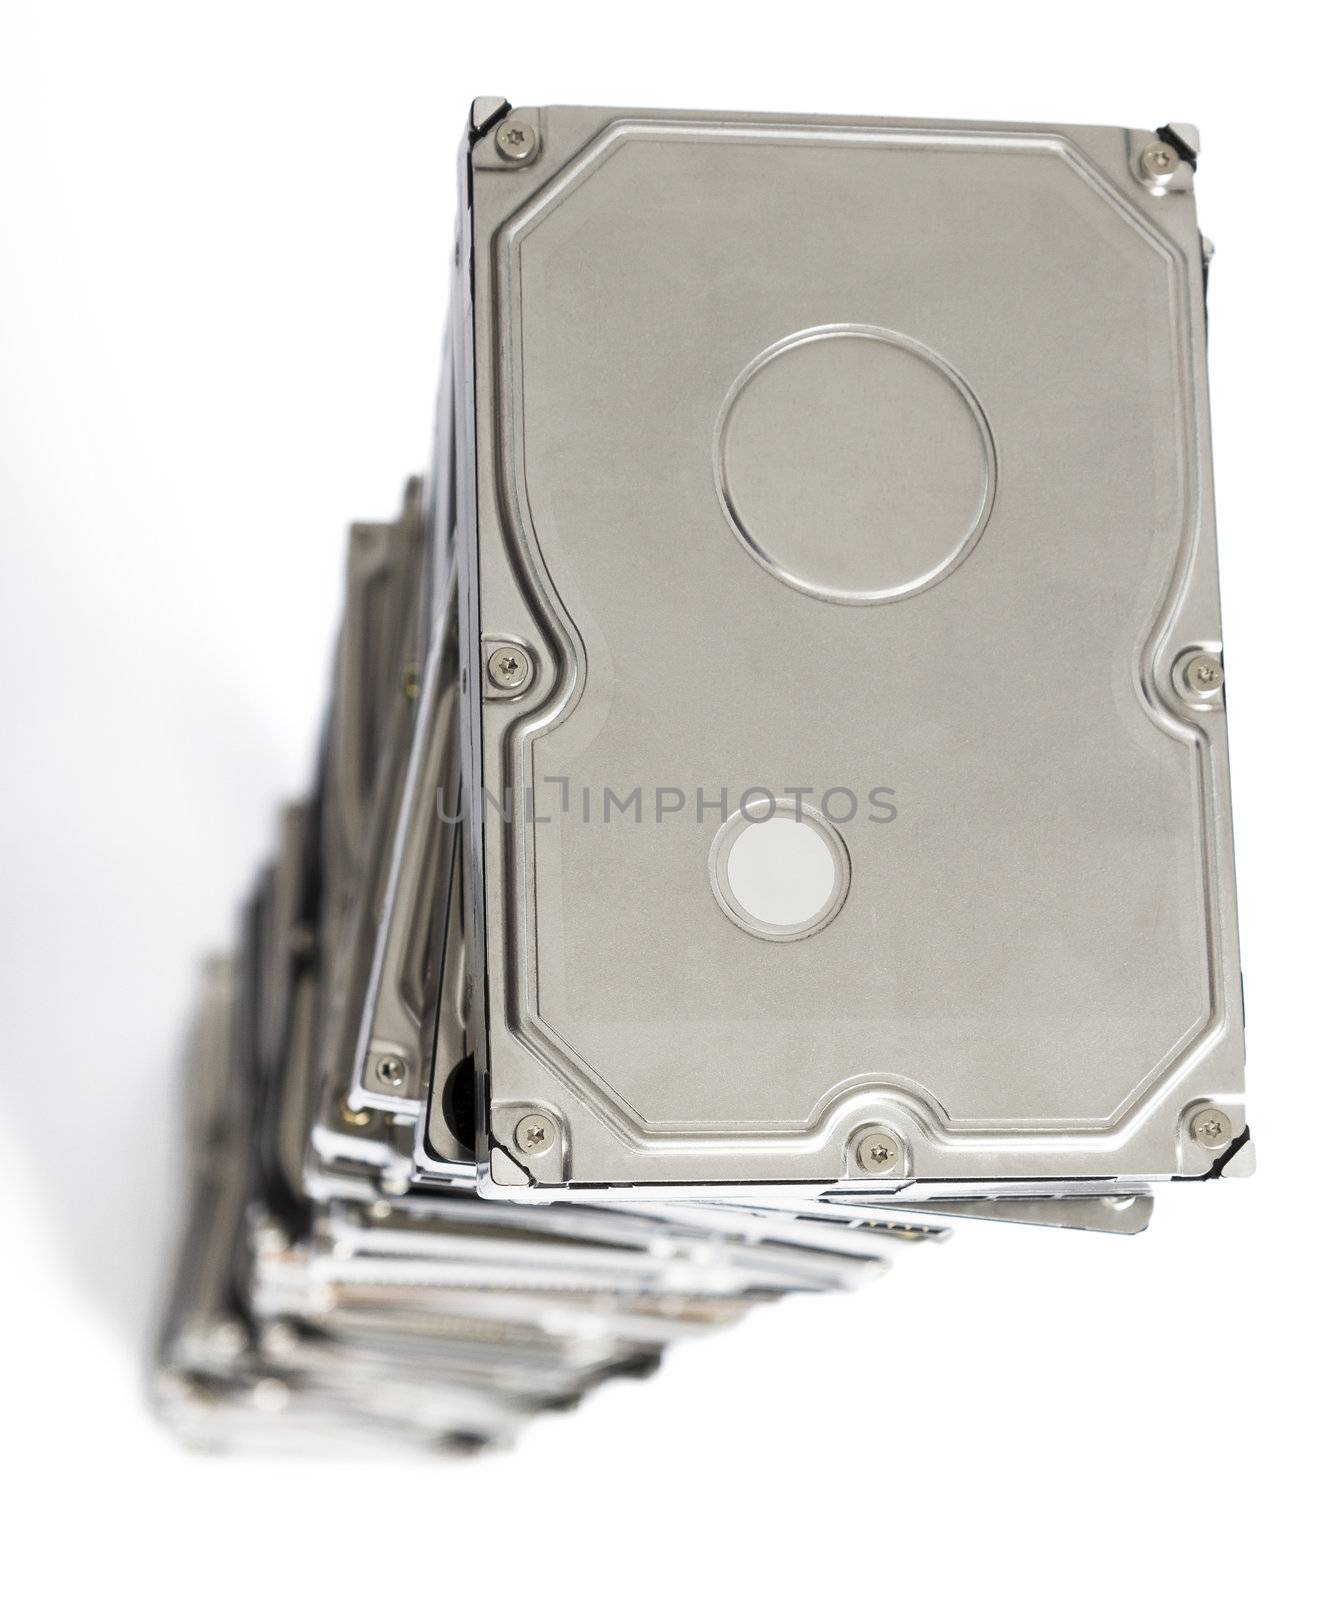 high stack of used hard drives by gewoldi